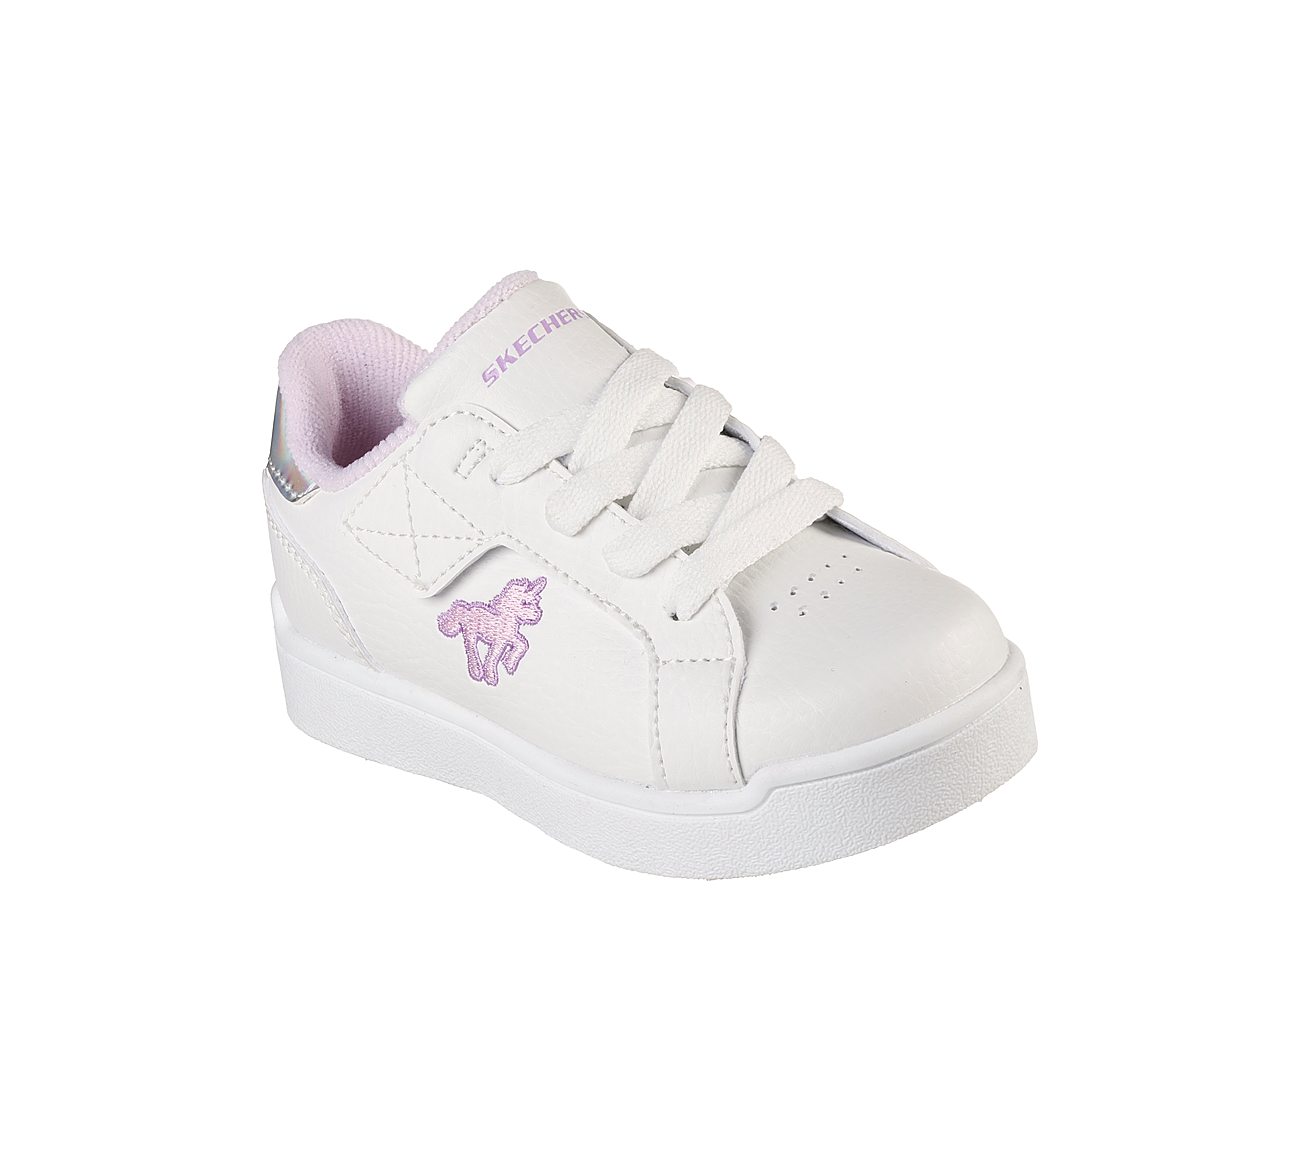 E-PRO-LIL UNICORN, WHITE/PINK Footwear Lateral View